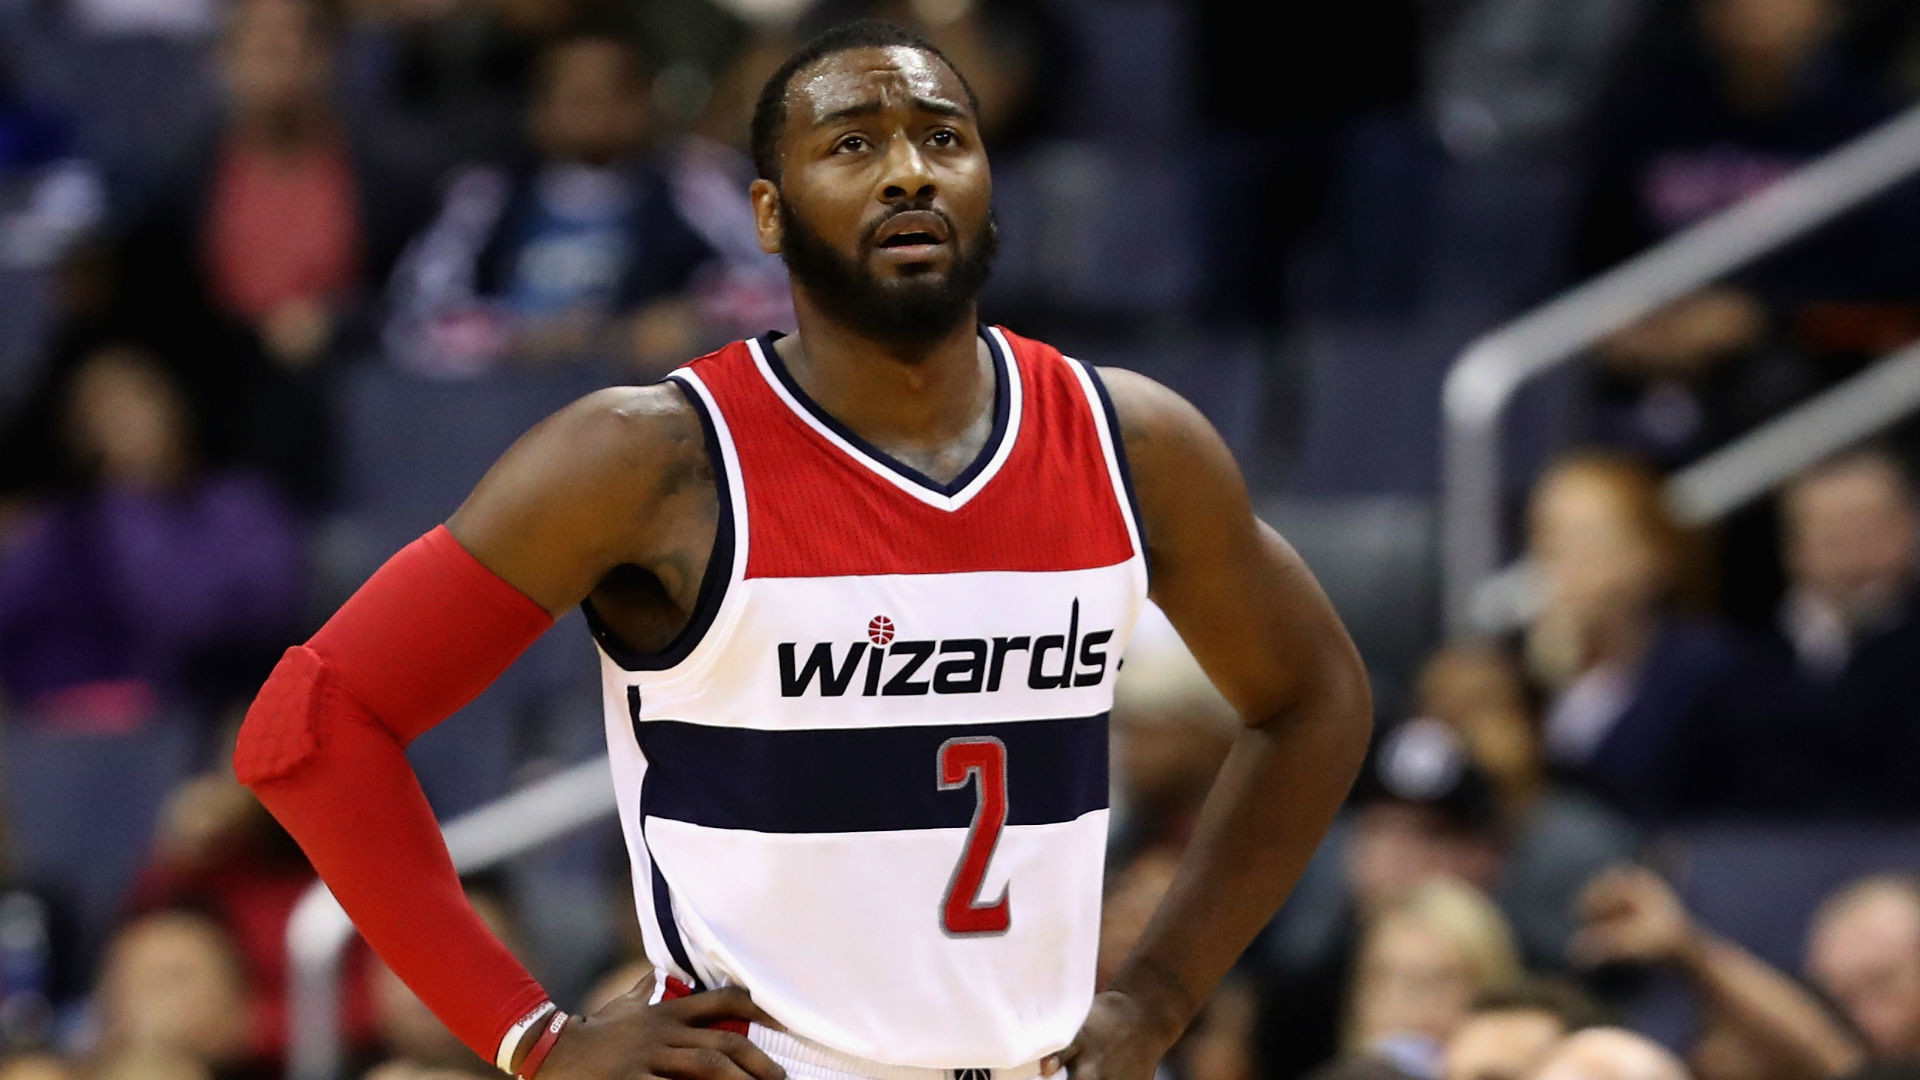 Wizards blew chance to help John Wall and themselves NBA Sporting News